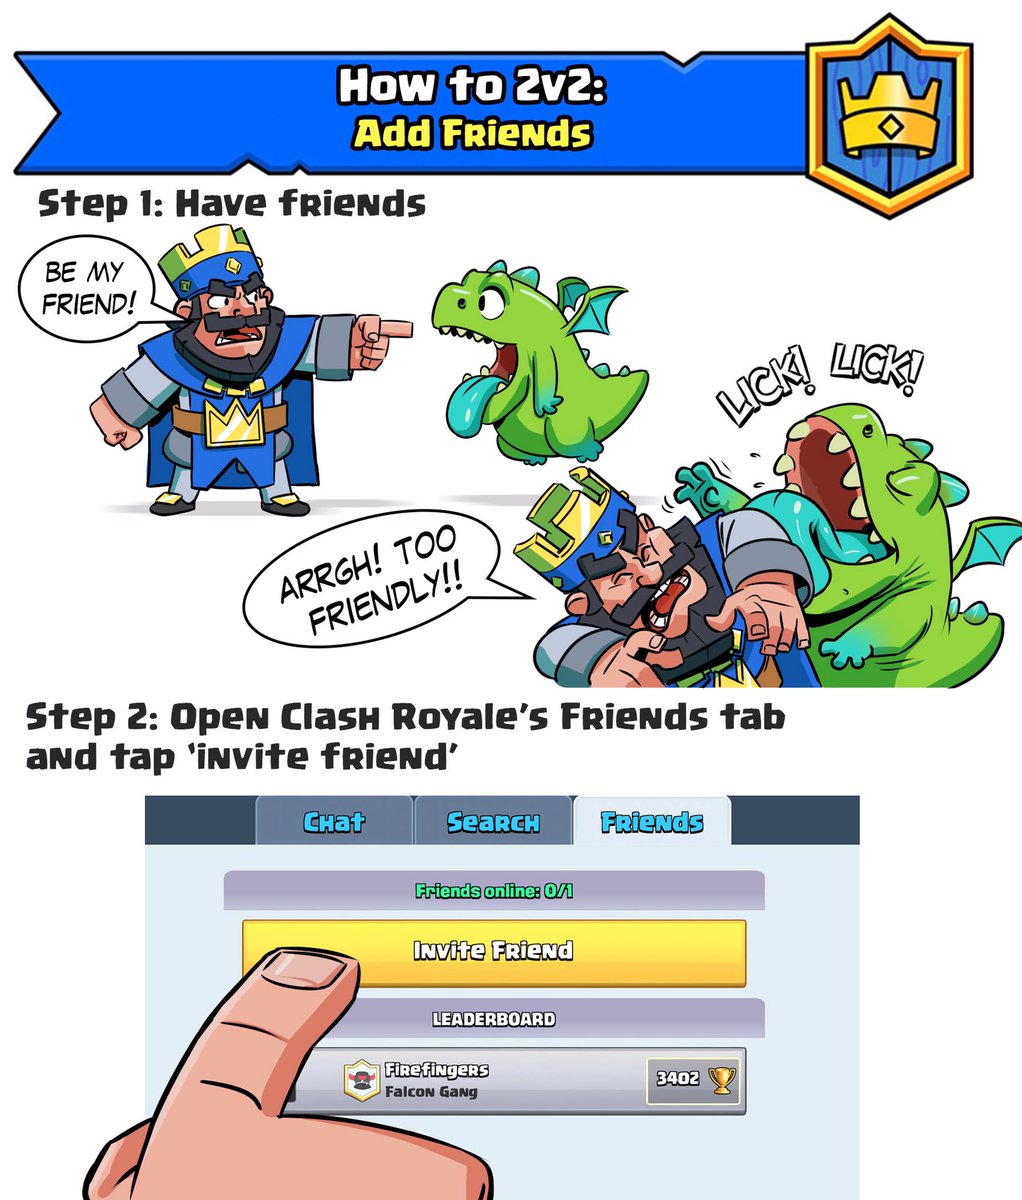 Clash Royale On Twitter How To 2v2 Add Friends